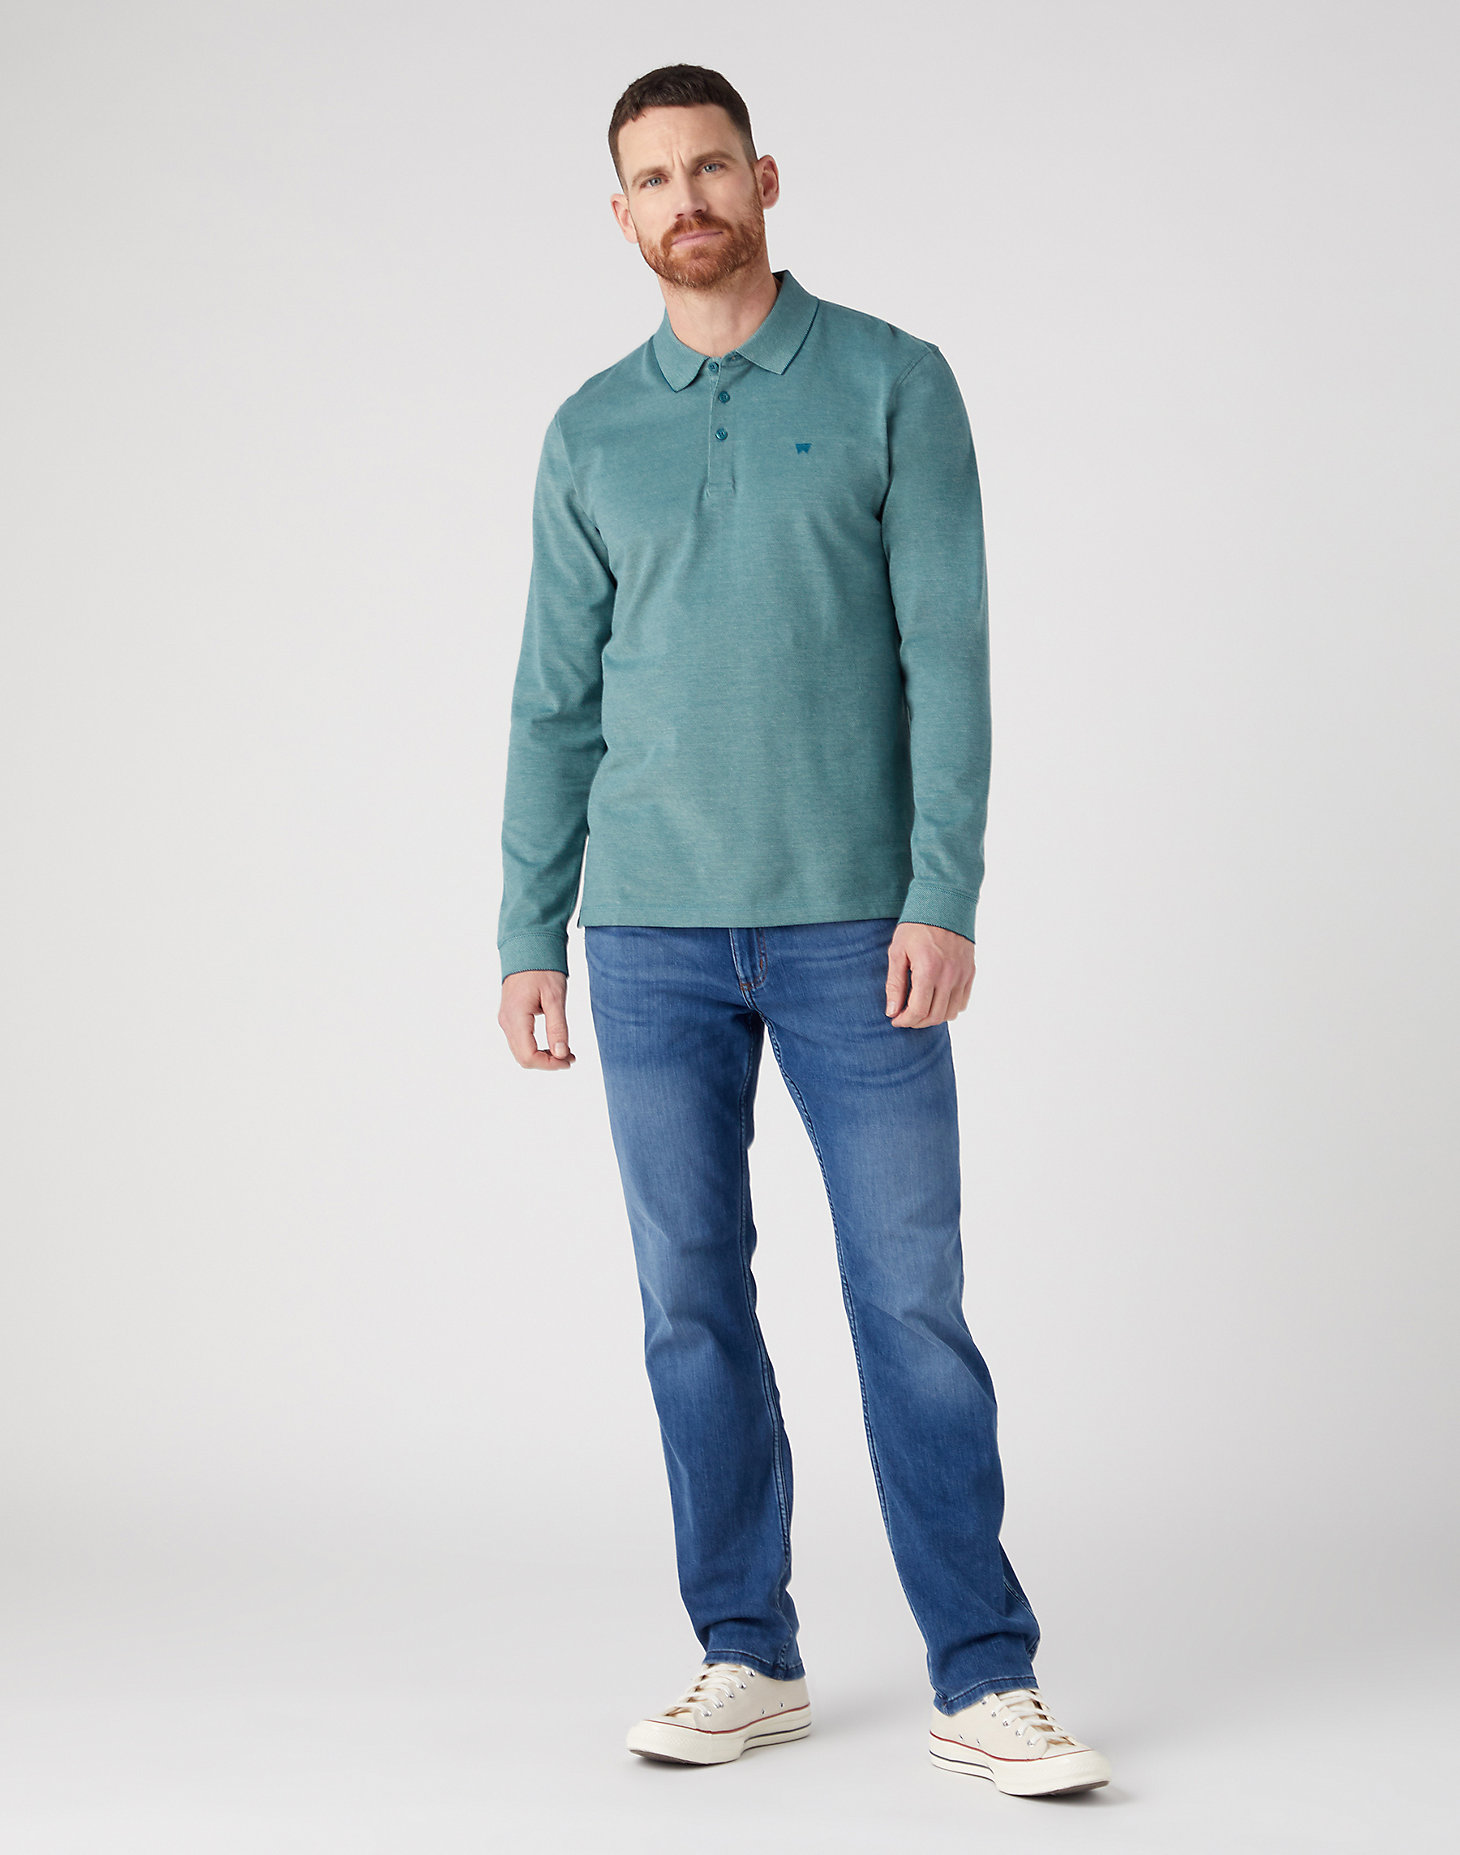 Long Sleeve Refined Polo in Deep Teal Green alternative view 1